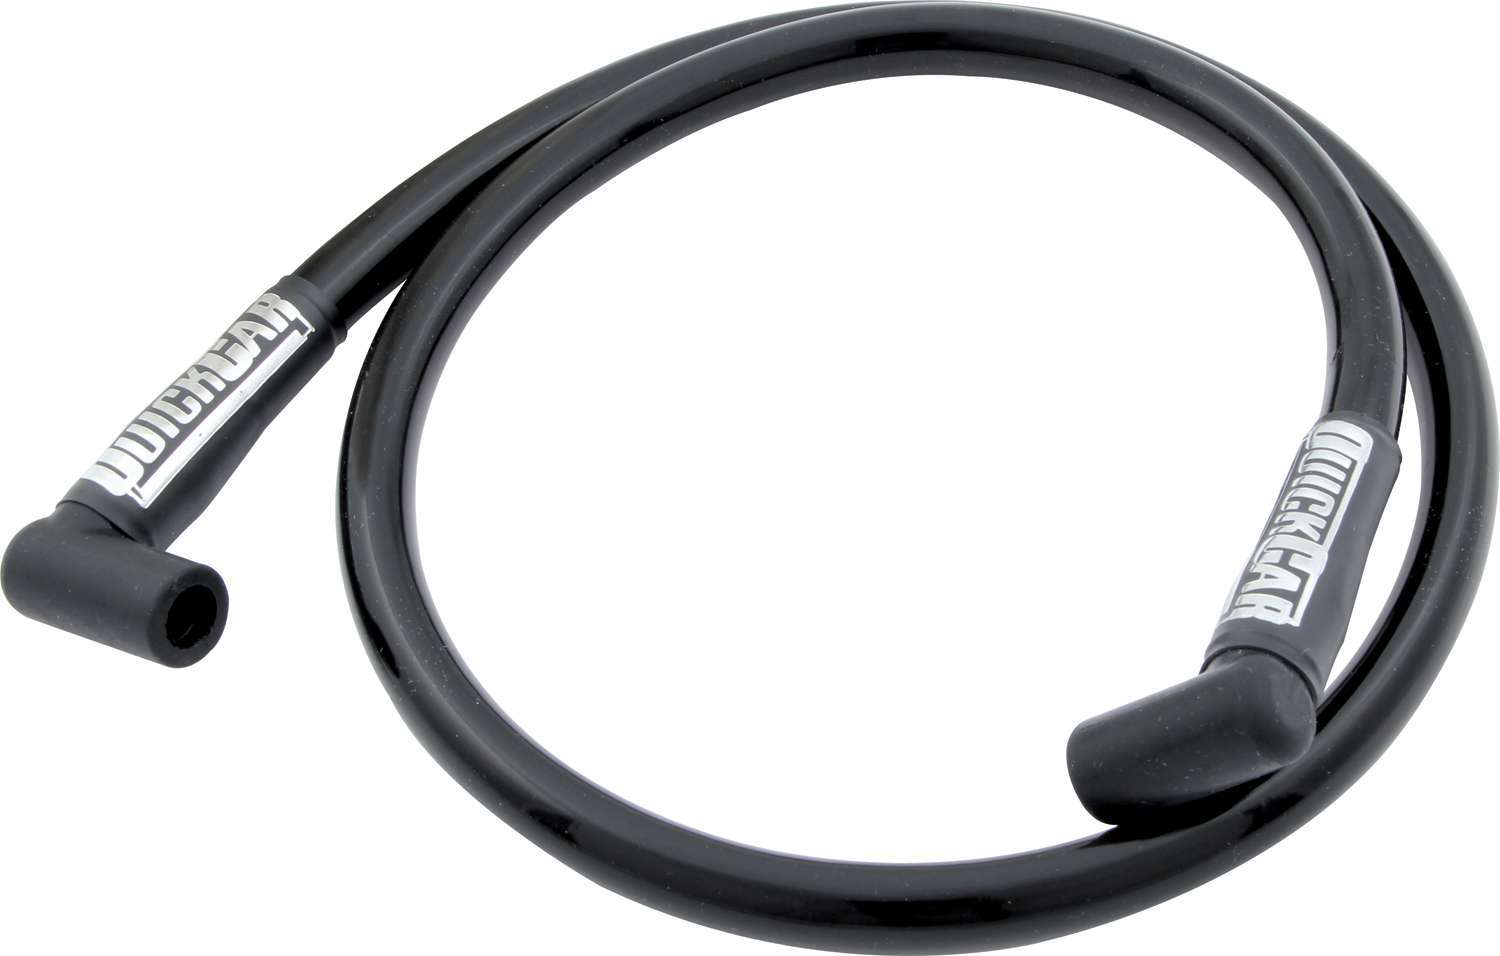 QuickCar 40-363 Coil Wire, Spiral Core, 11.5 mm, Sleeved, 36 in Long, Black, HEI Style Terminal, Each